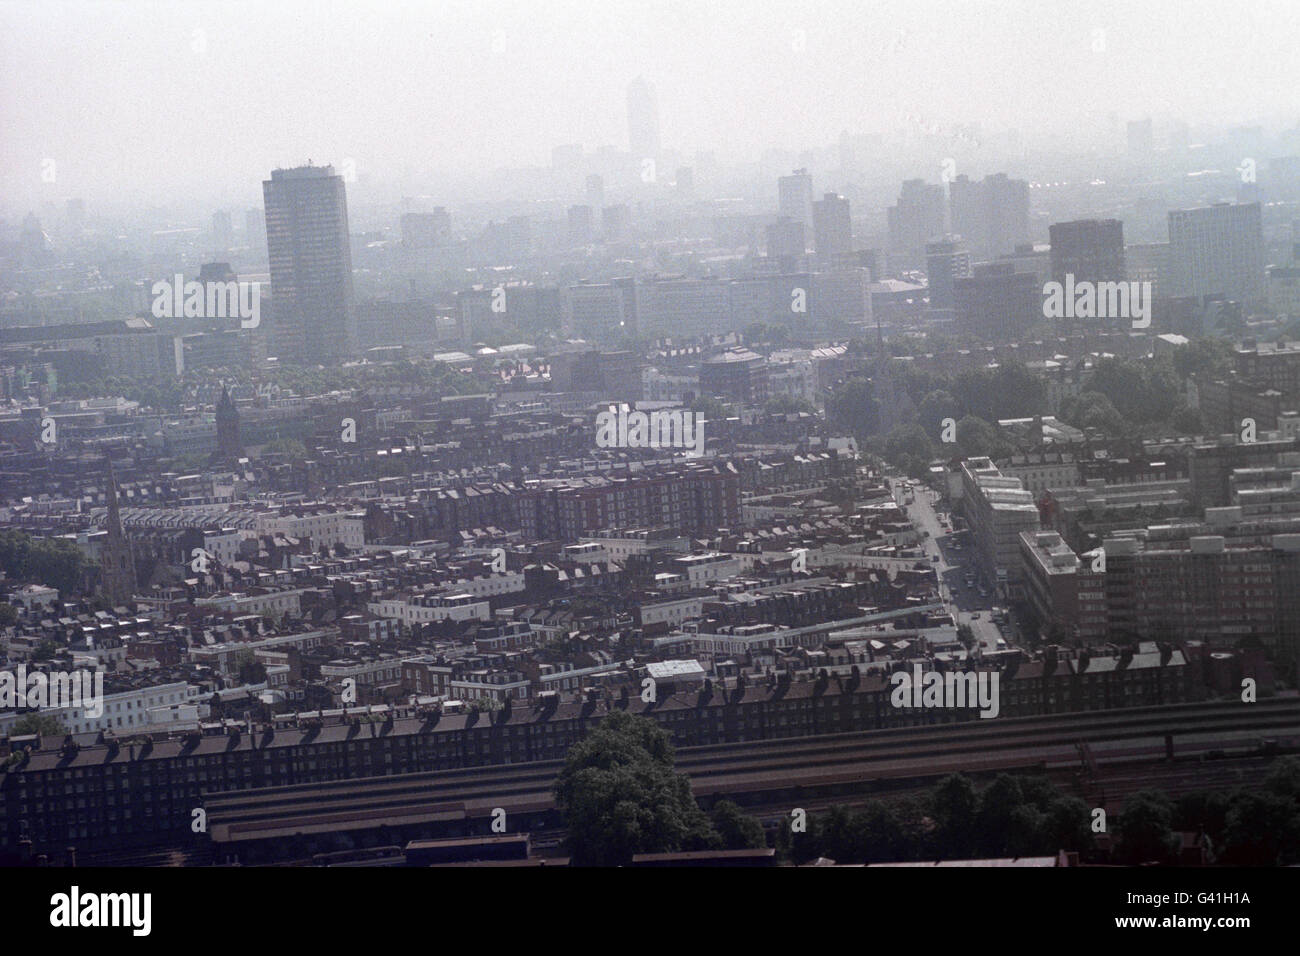 Pollution in London. Canary Wharf (centre back) is hardly visible through the haze over London. Stock Photo